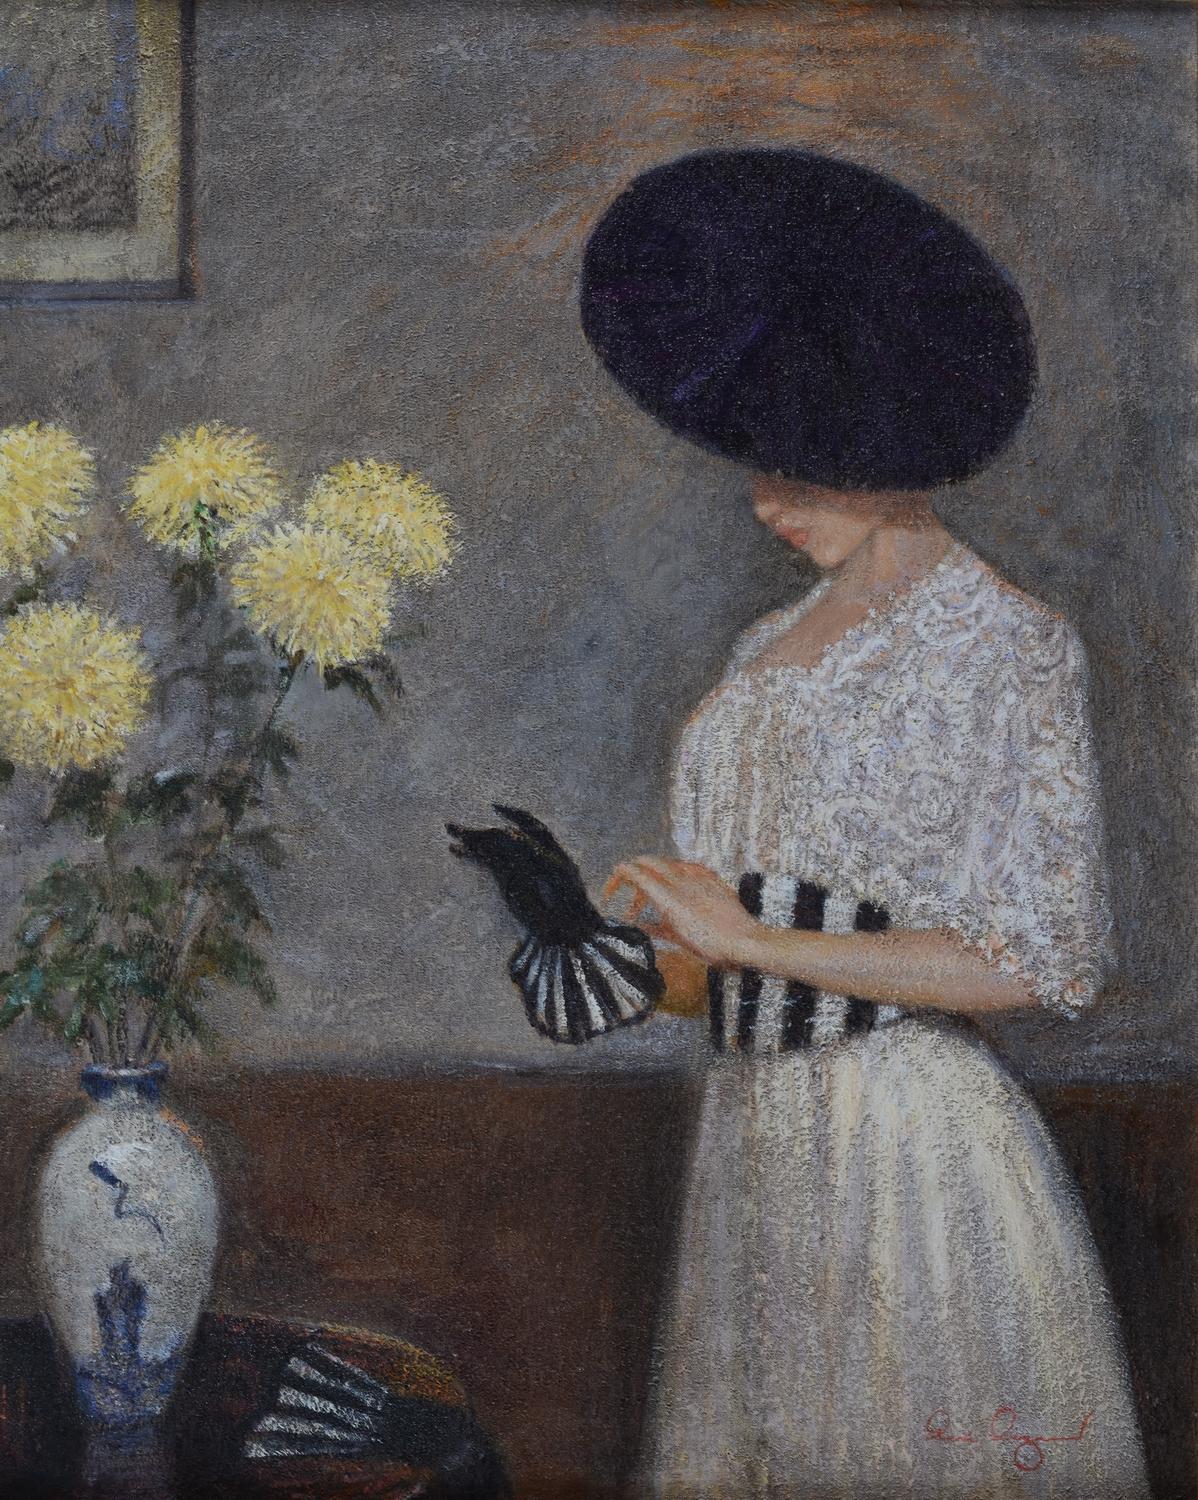 The Black Hat on beautiful model in white dress and gloves near bunch of flowers - Art by Rene Legrand